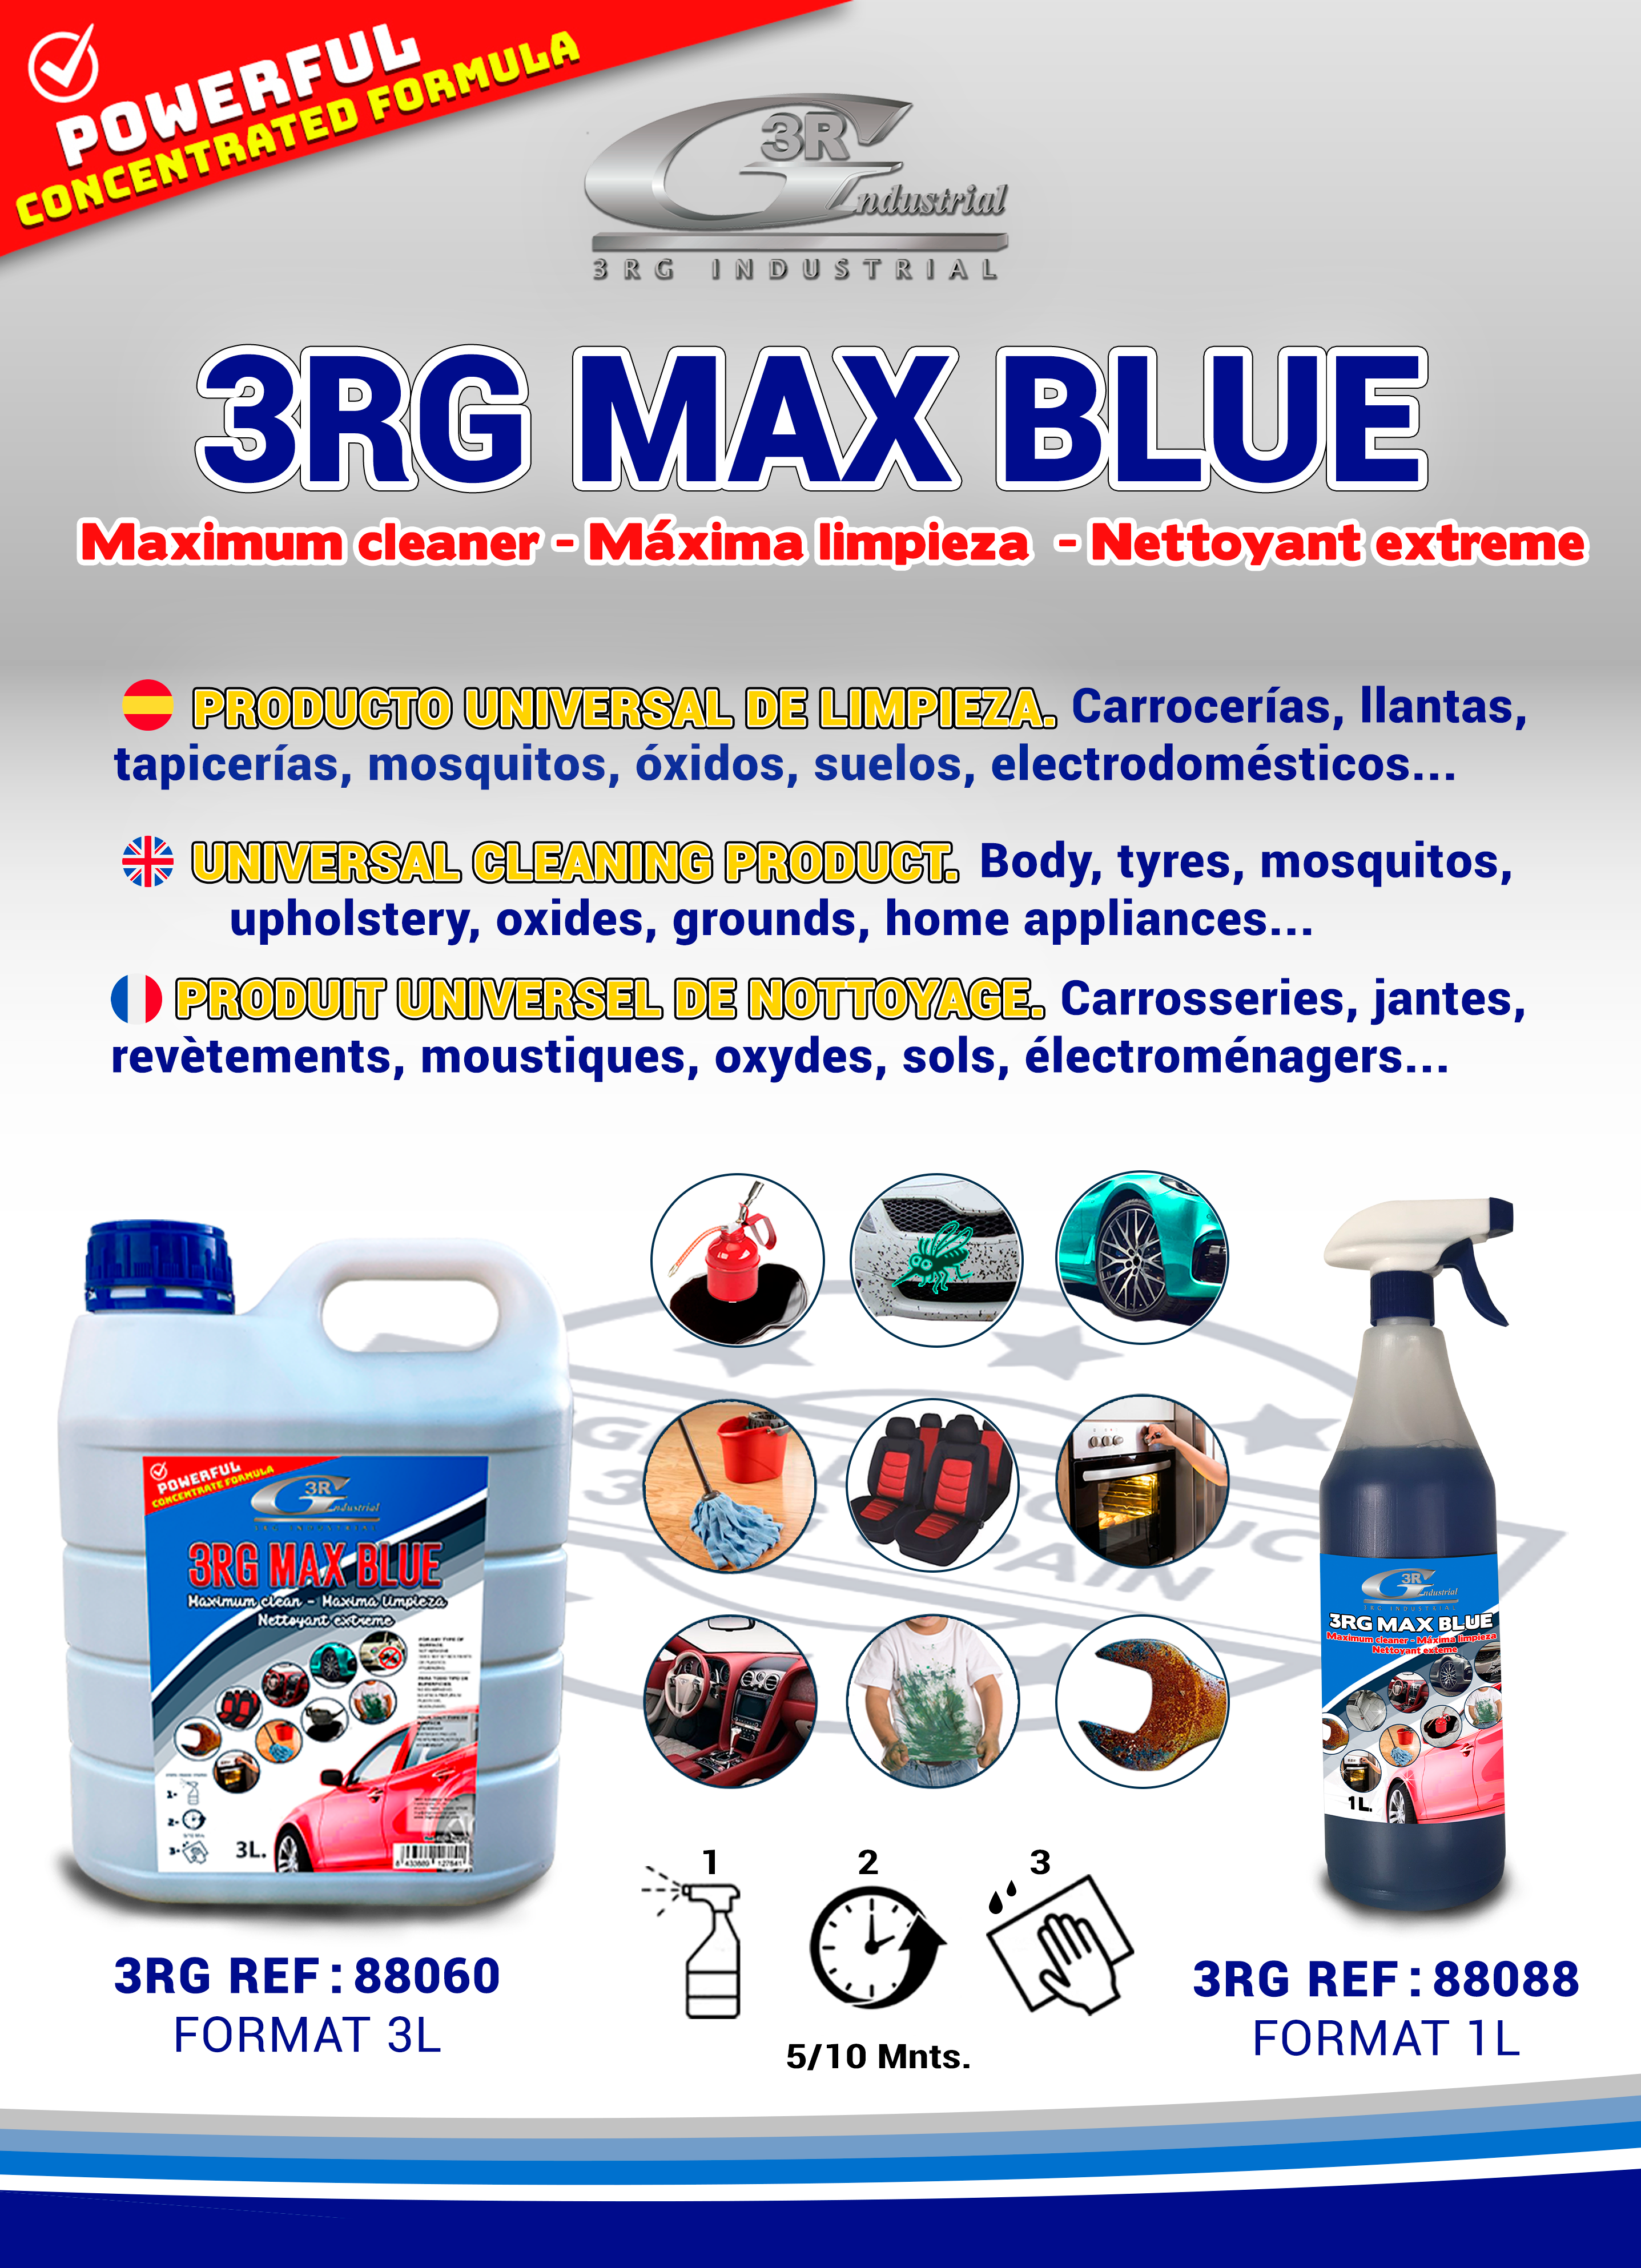 3RG MAX BLUE - Universal cleaning product